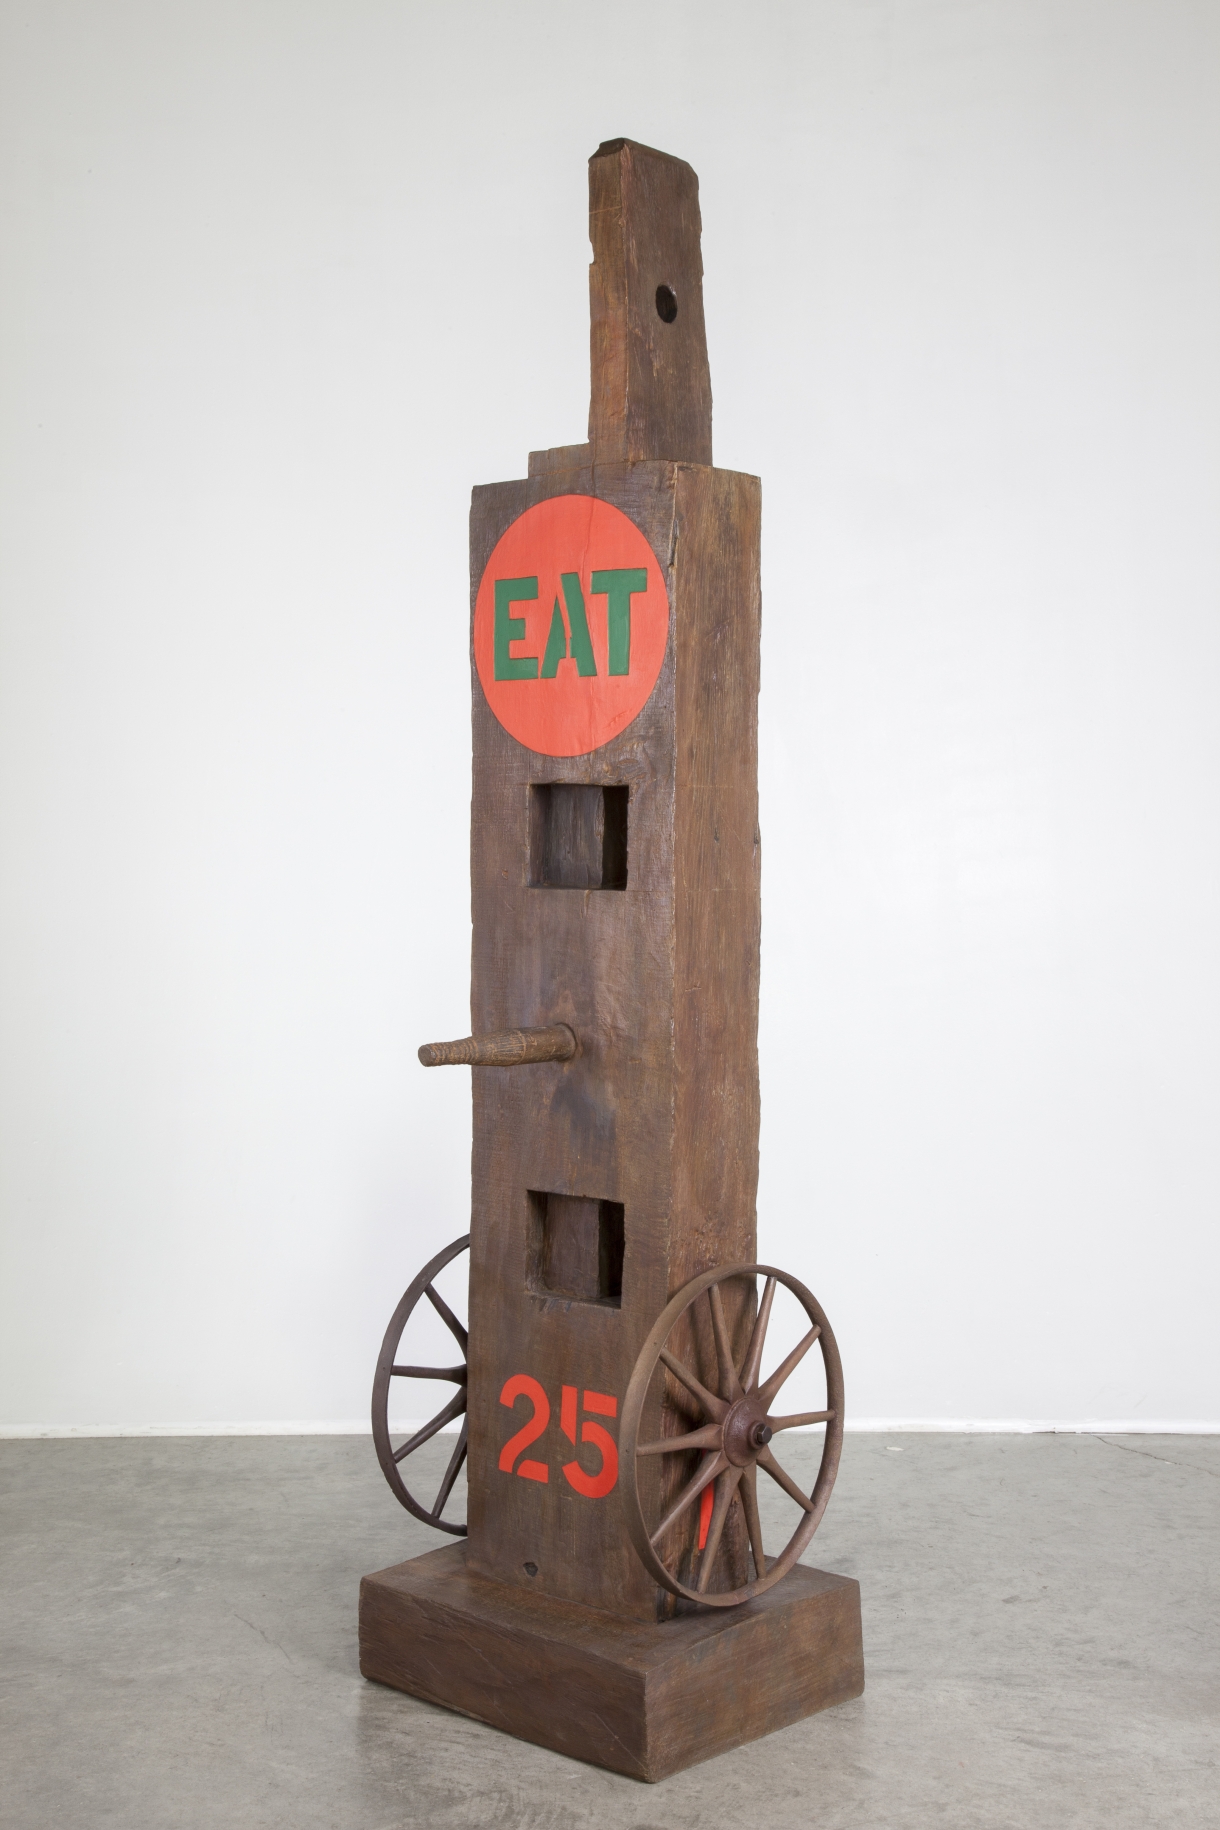 Eat is a 58 5/8 by 15 by 12 5/8 painted bronze sculpture of a beam with a tenon, standing on a base. A wheel is affixed to the right and left sides at the bottom of the sculpture. In between a red number 25 has been painted. A peg protrudes from the center of the sculpture, and at the top of the sculpture is a red circle containing the word "eat" painted in green stenciled letters.